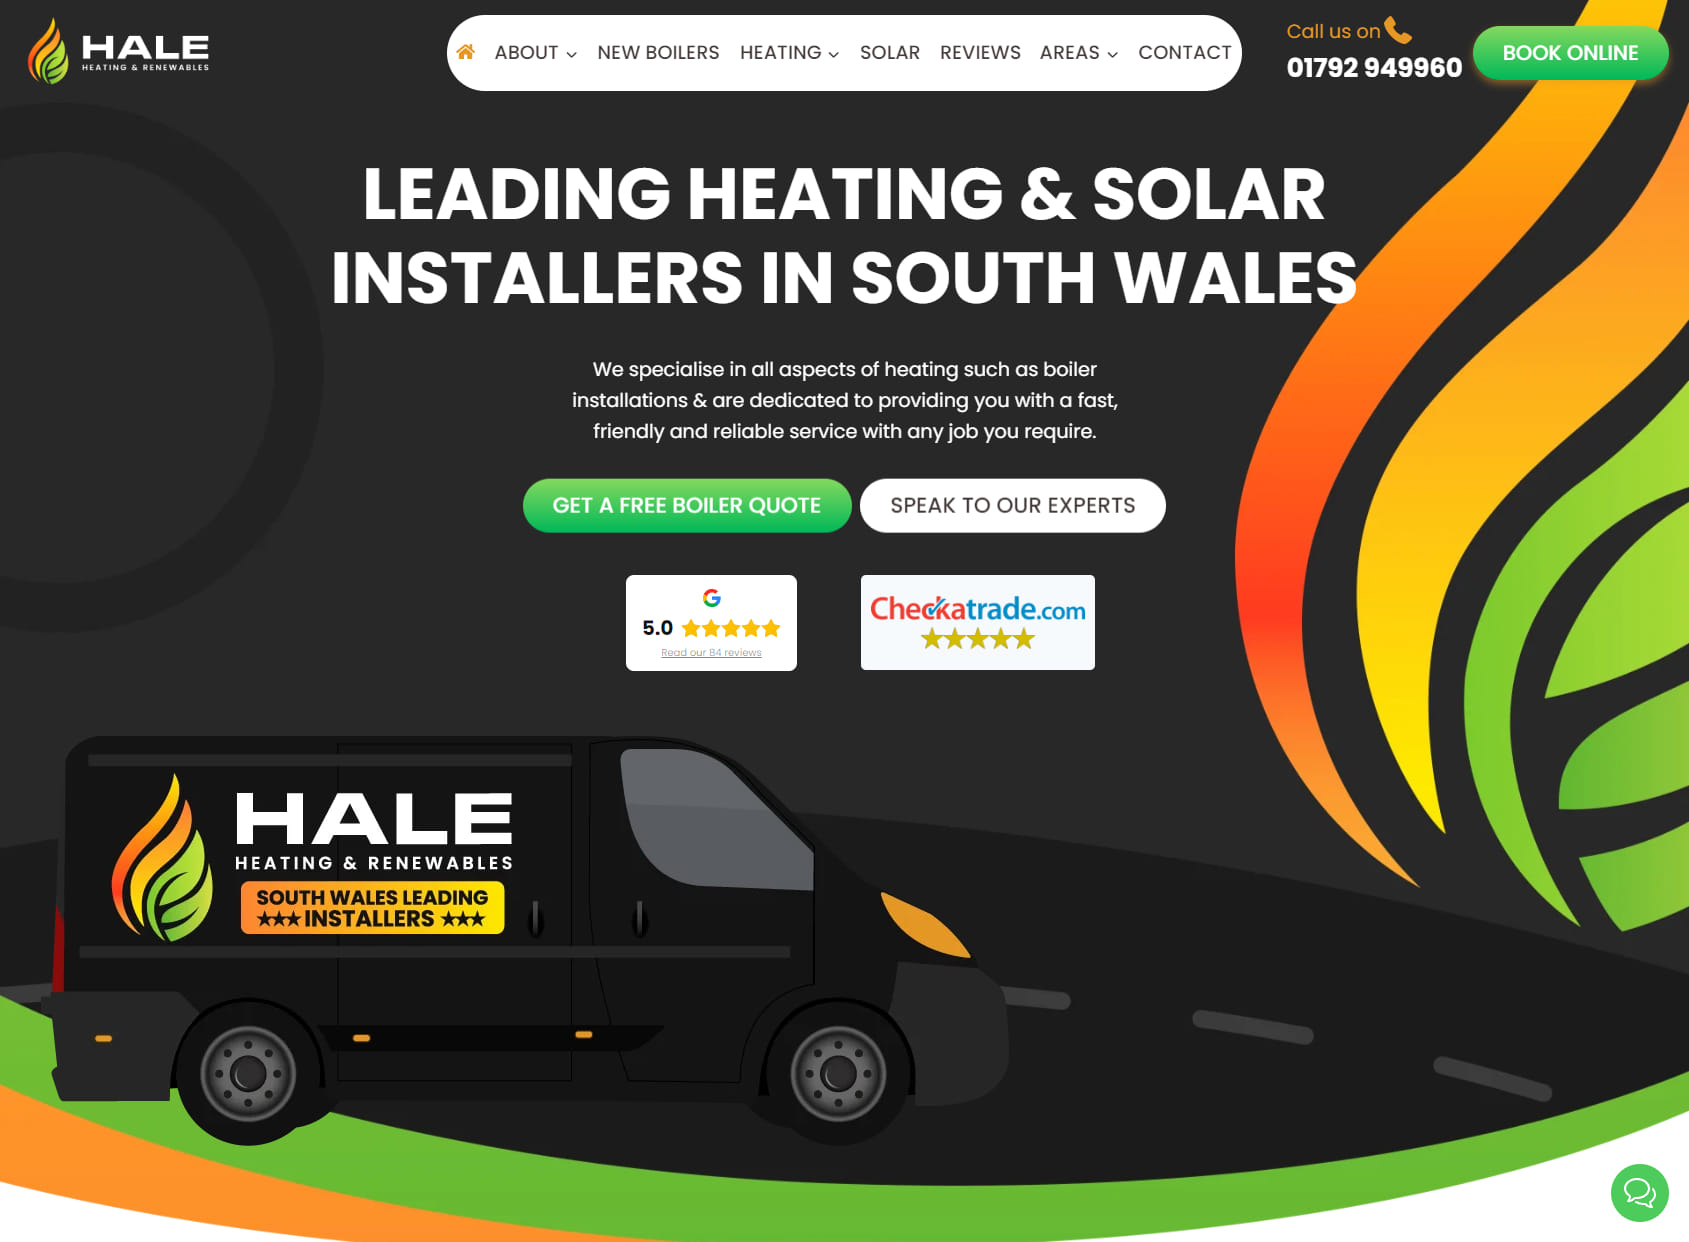 Hale Heating & Renewables | Solar & Heating Specialists in South Wales